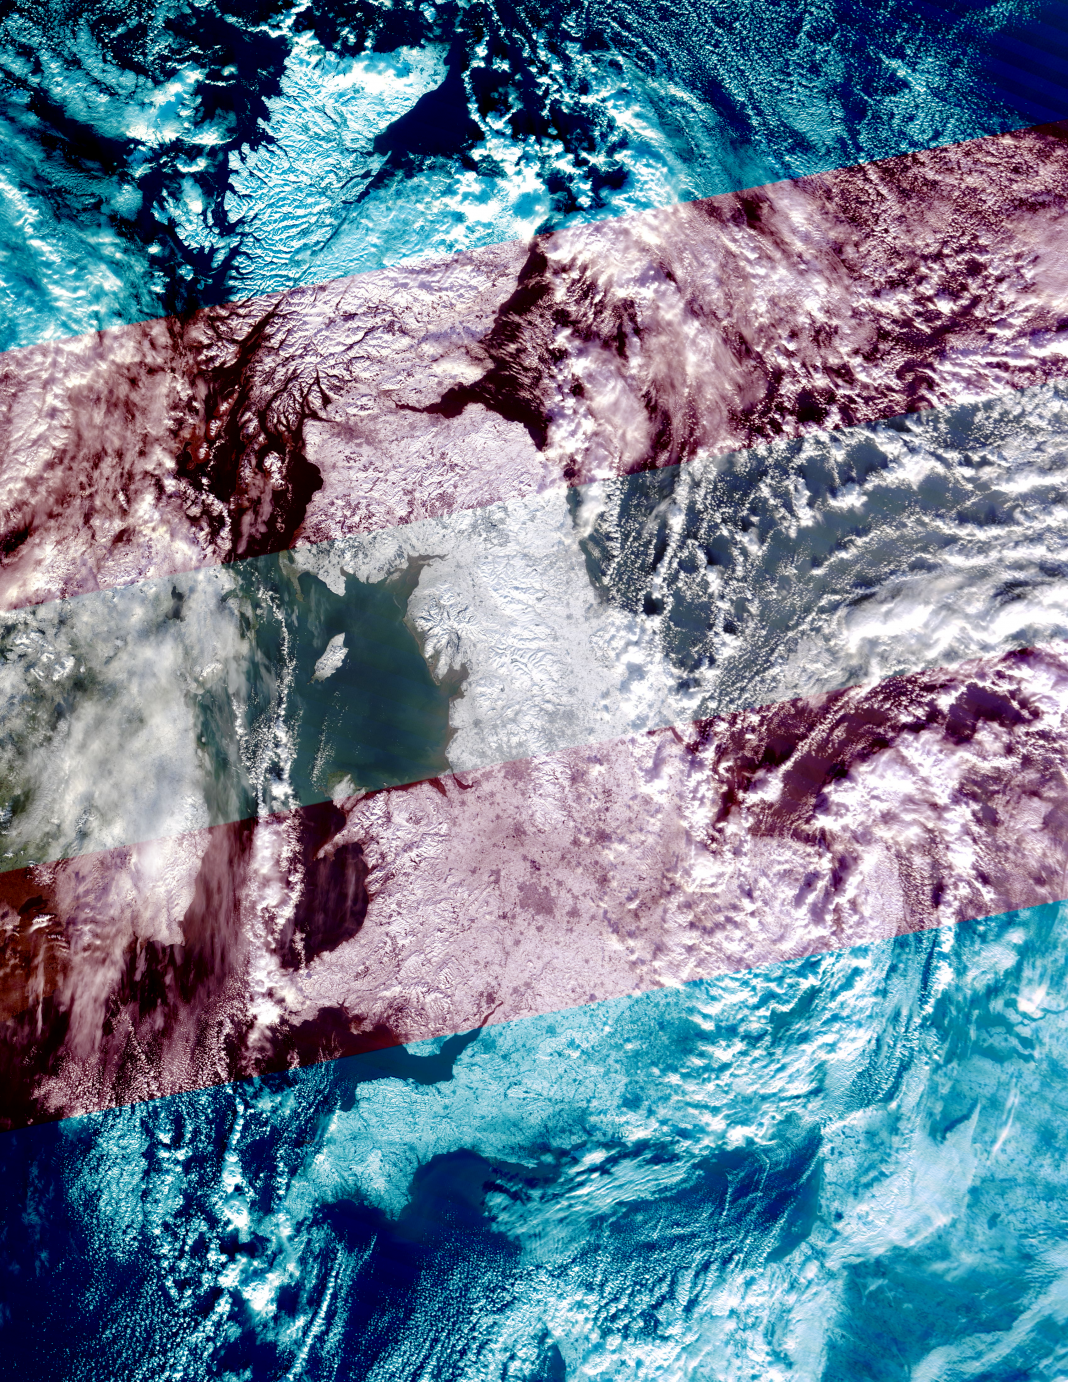 A satellite photo of the UK under snow that I have layered a trans flag over the top of. Trans Britain. That's what we are now. Woo.